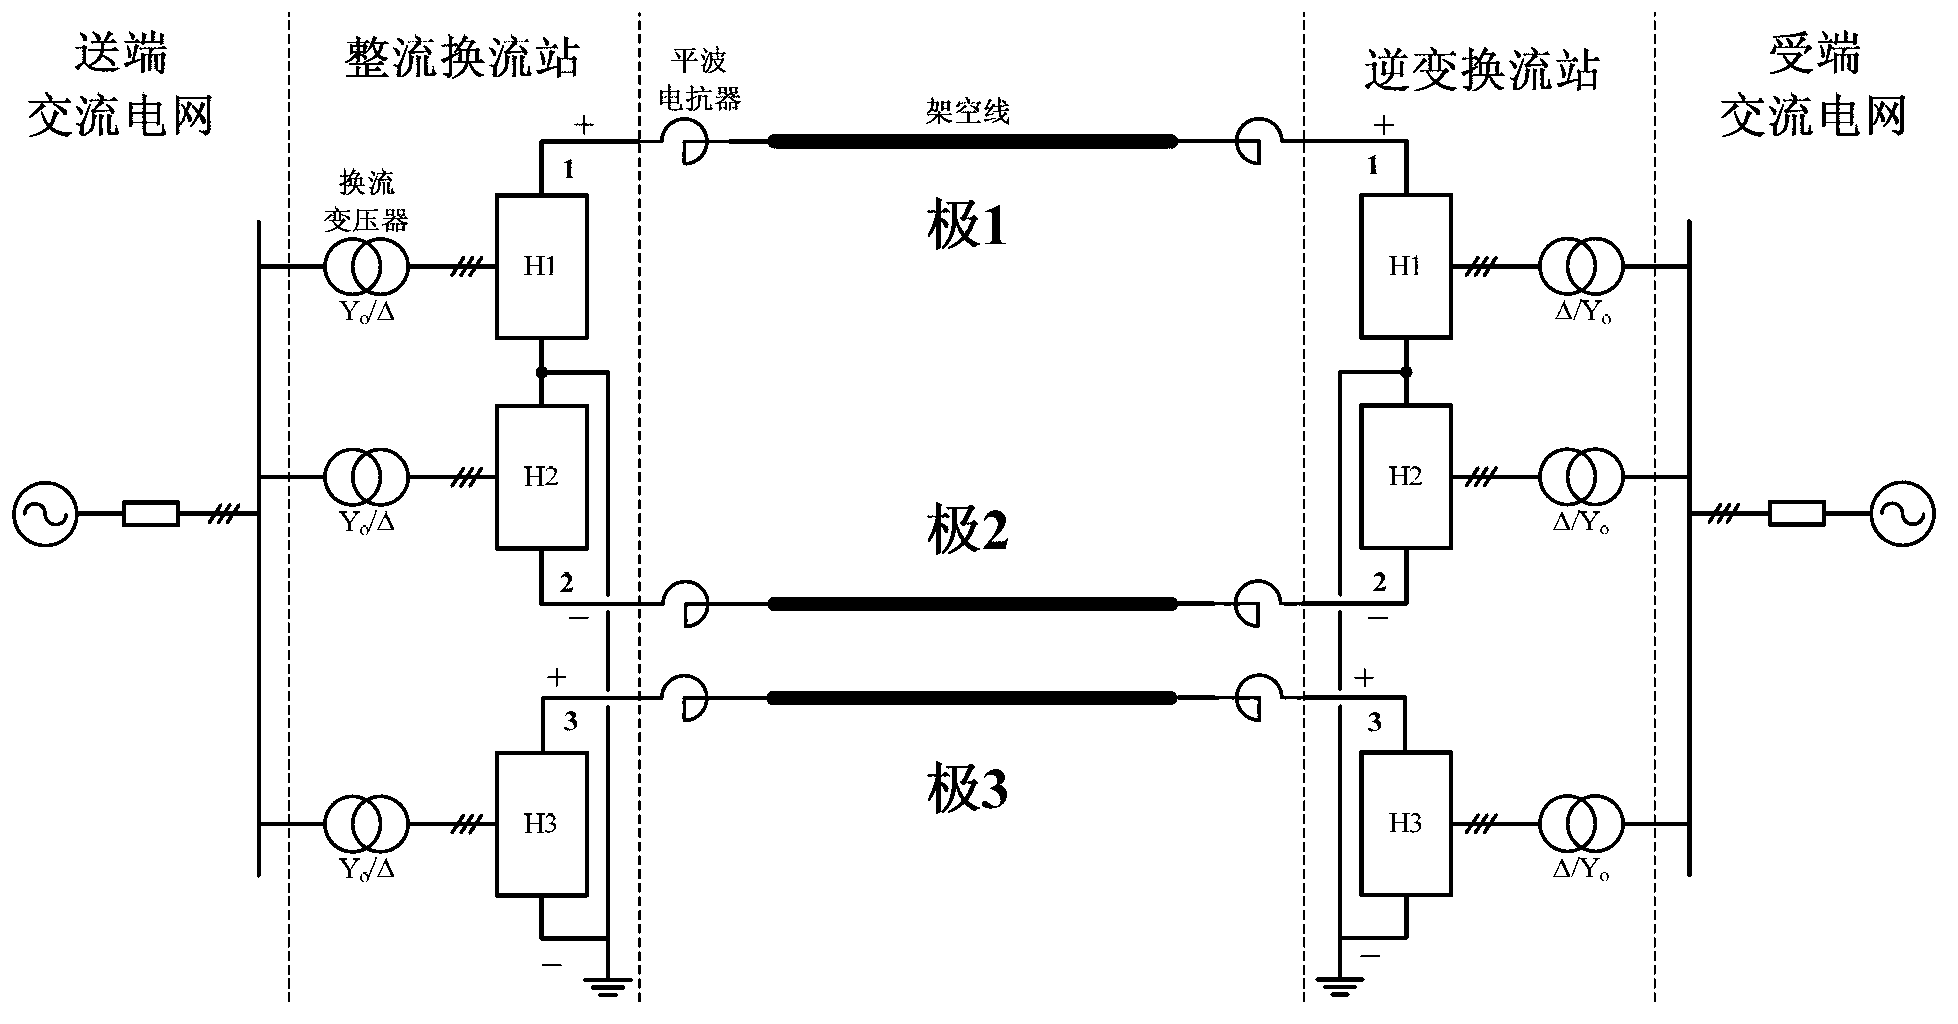 Direct current transmission system based on three-pole type structure